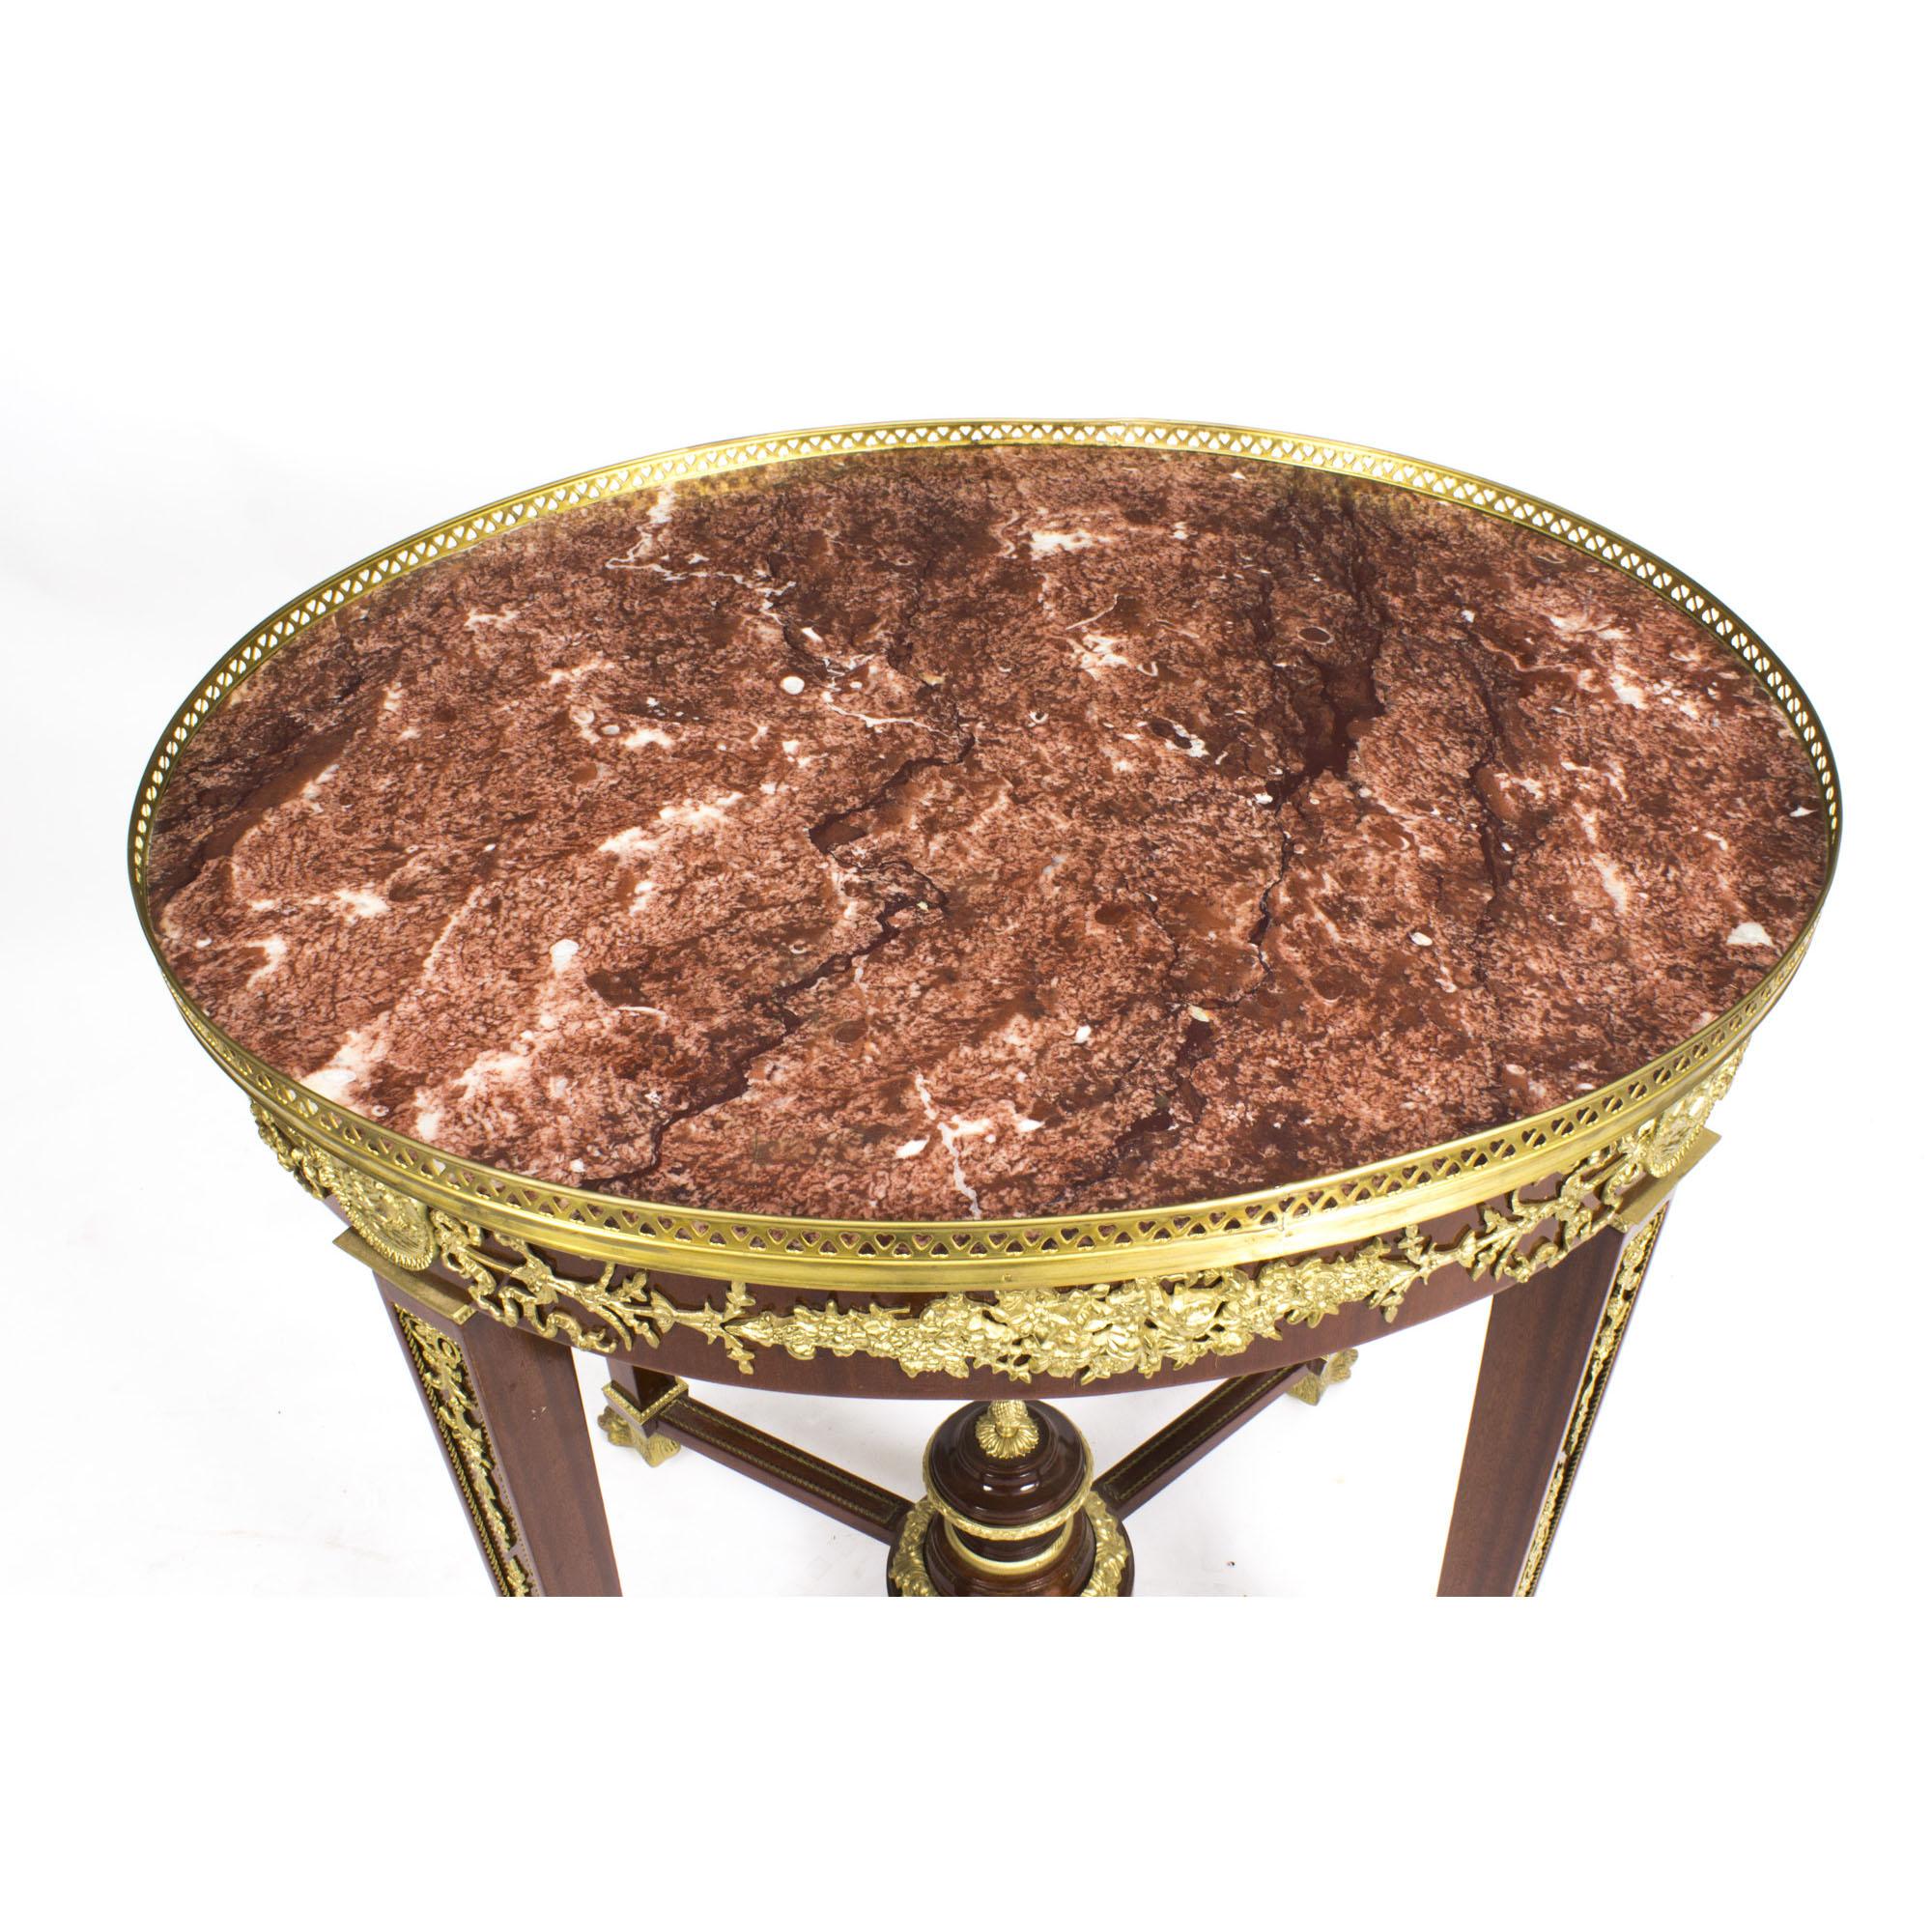 Vintage Empire Revival Marble Top Ormolu Mounted Occasional Table 20th C In Good Condition For Sale In London, GB